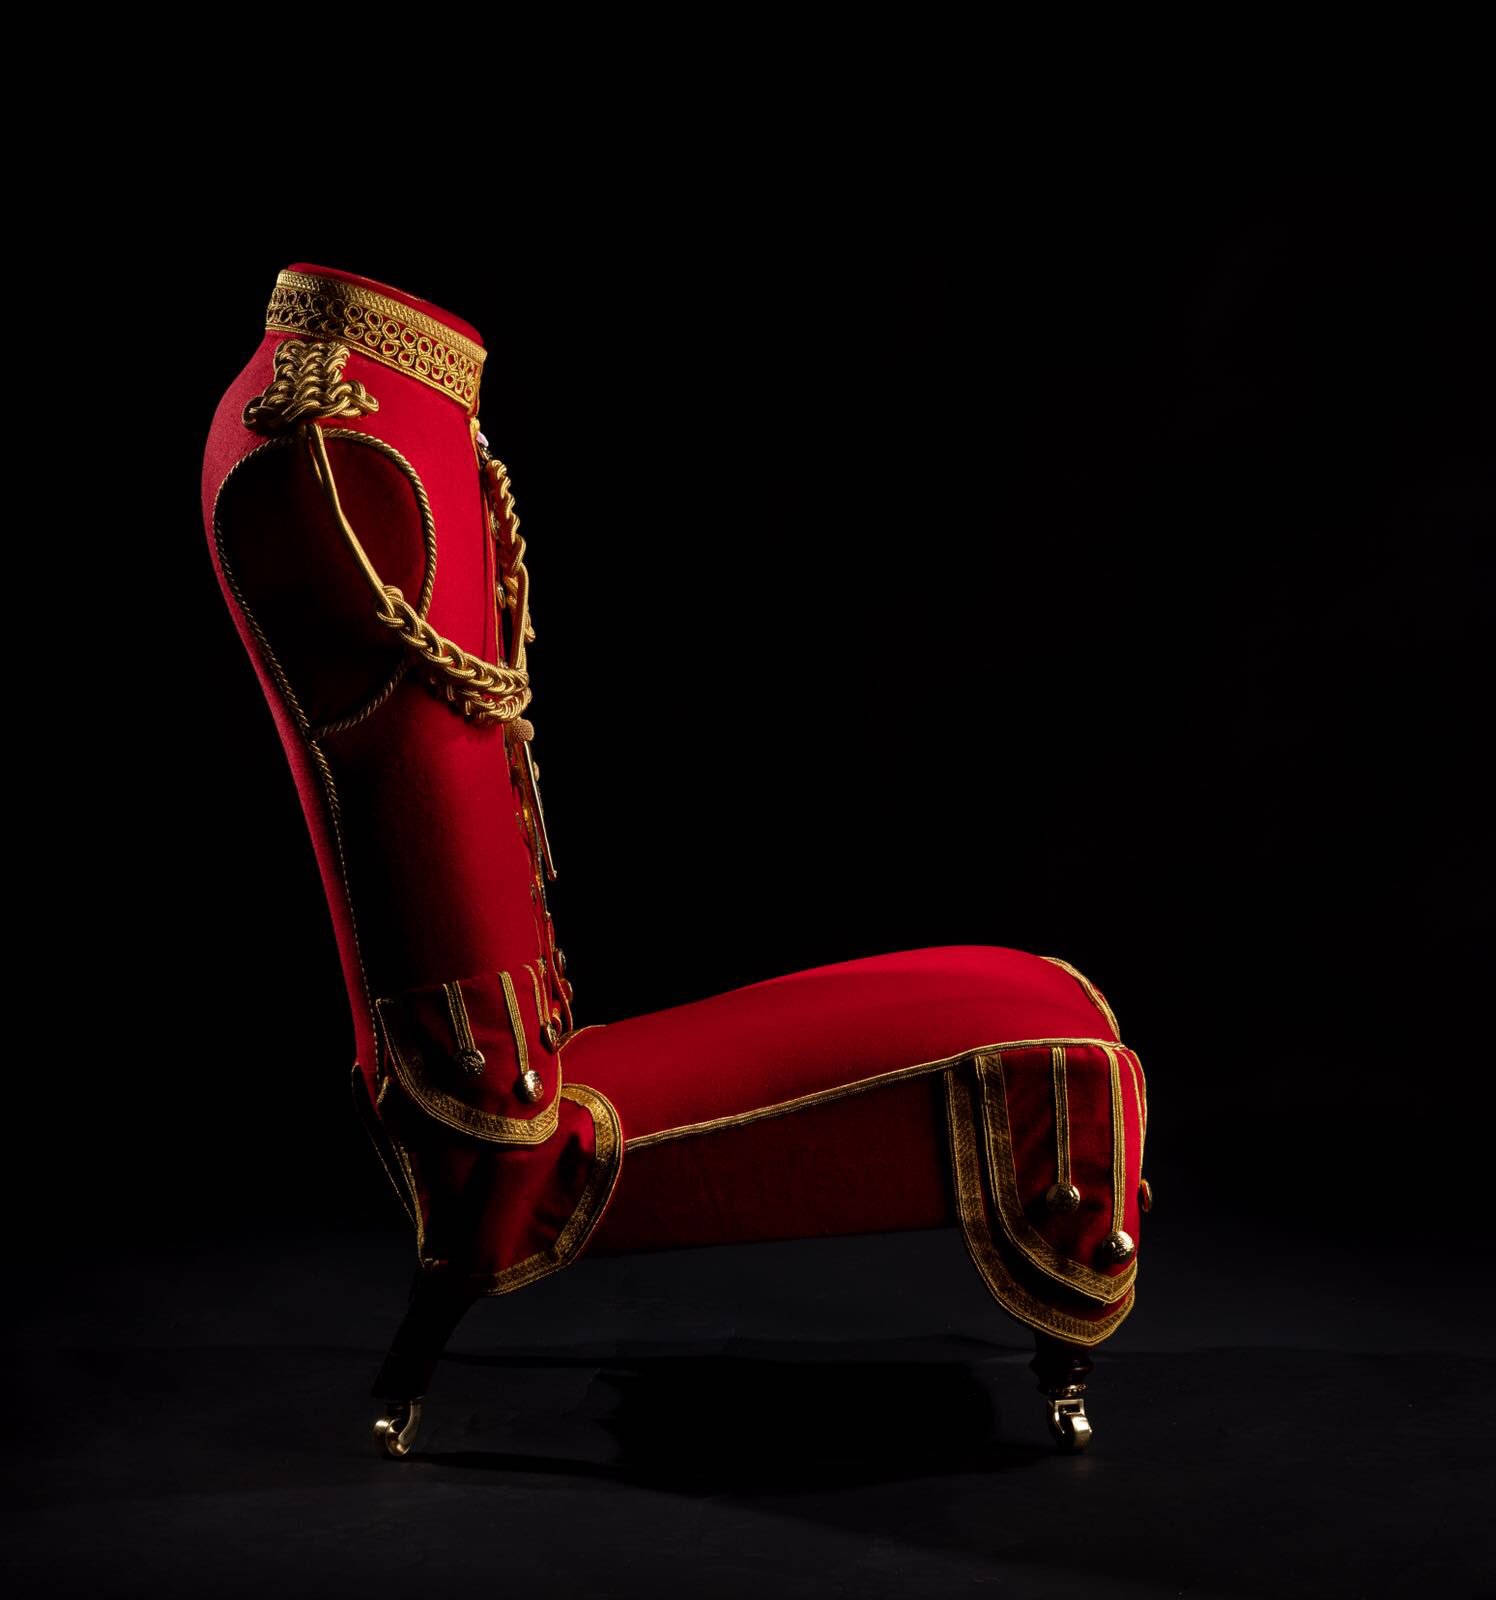 shaun brownell ©️ on twitter "'the maharaja chair